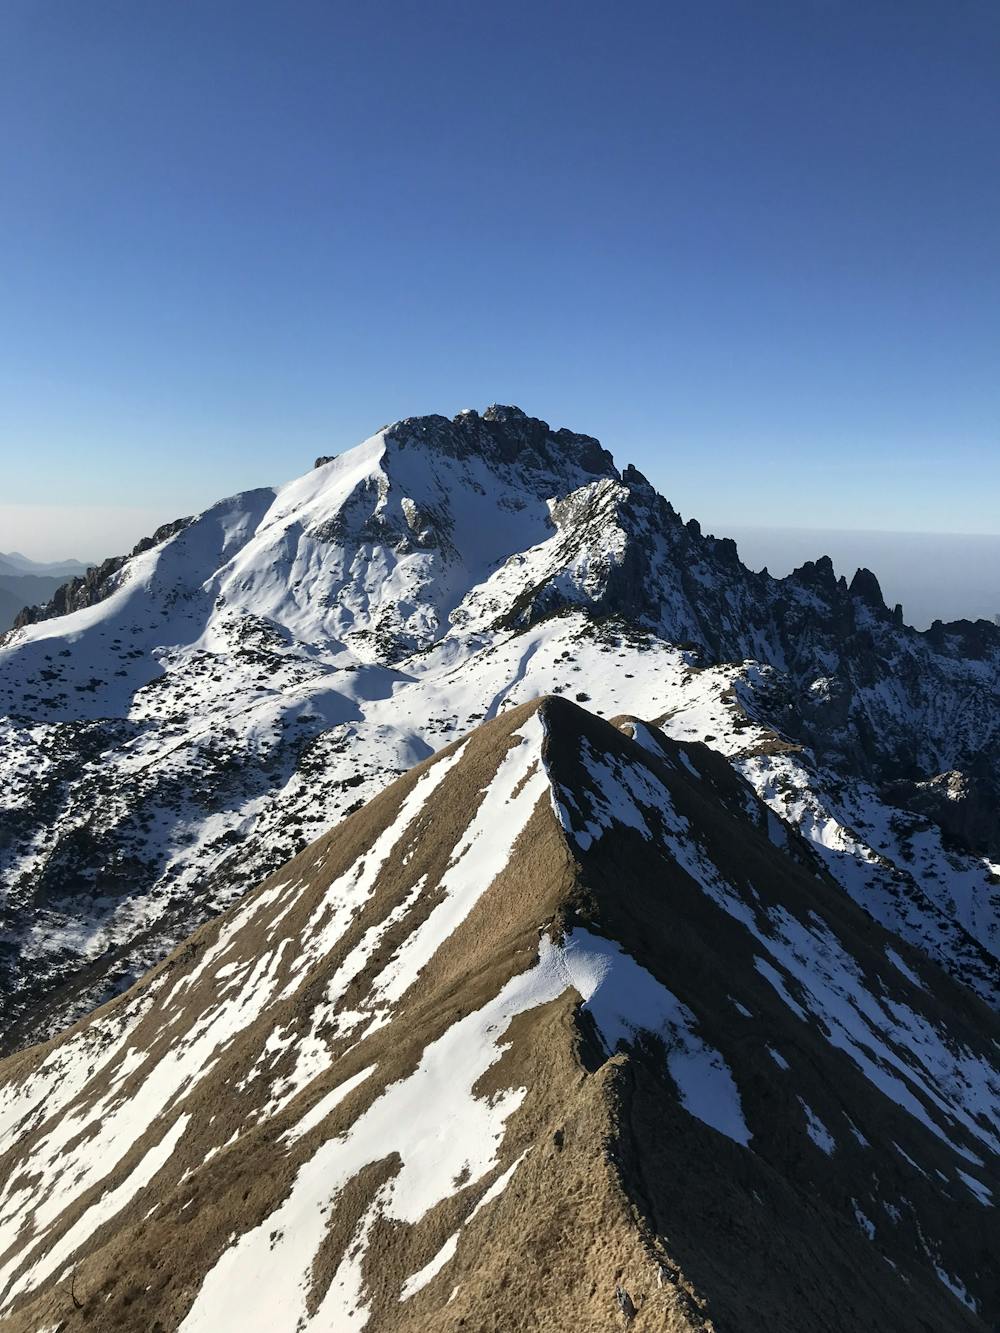 view from Brioschi  hut (located at the top of the Grigna Settentrionale)to the route from the Grigna Meridionale 